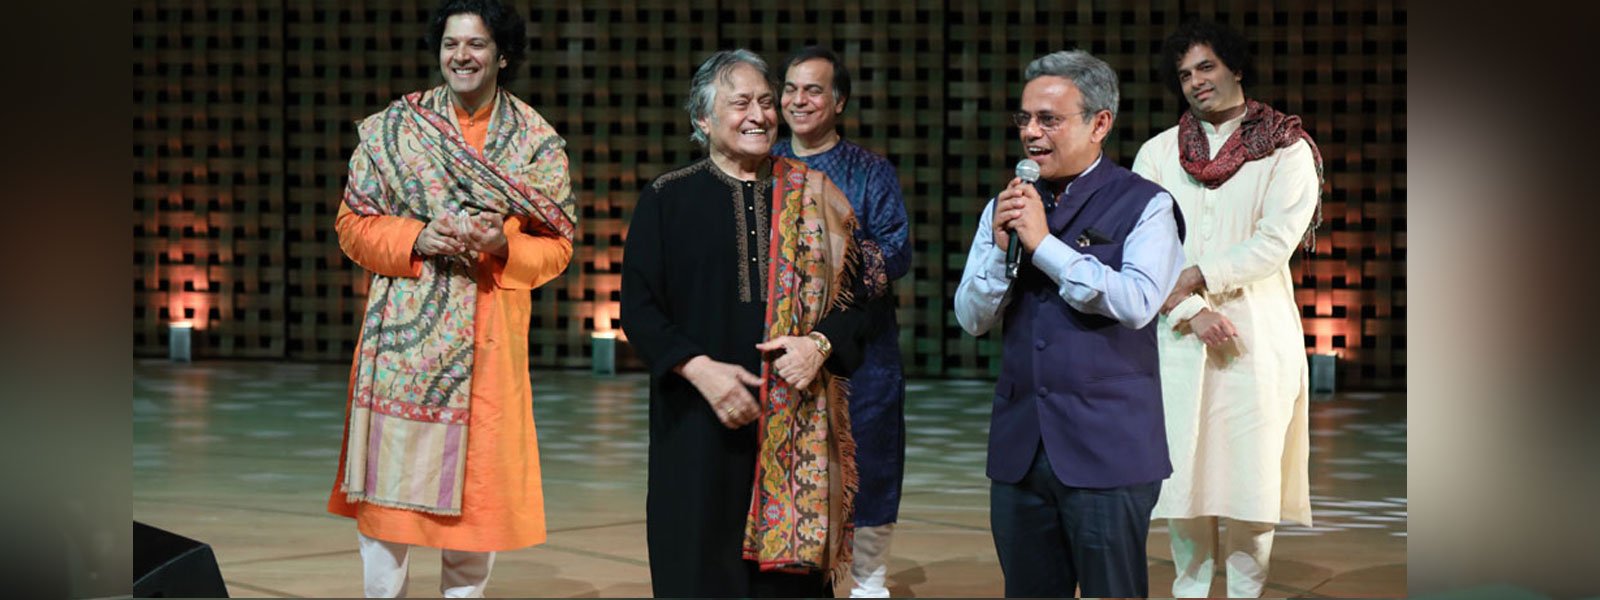 Four glorious days of Namaste France (06-09 July) comprising Music, Dance, Exhibitions, Workshops, Indian food, Craft bazaar closed with a spectacular concert by Ustad Amjad Ali Khan and his sons Amaan and Ayaan.